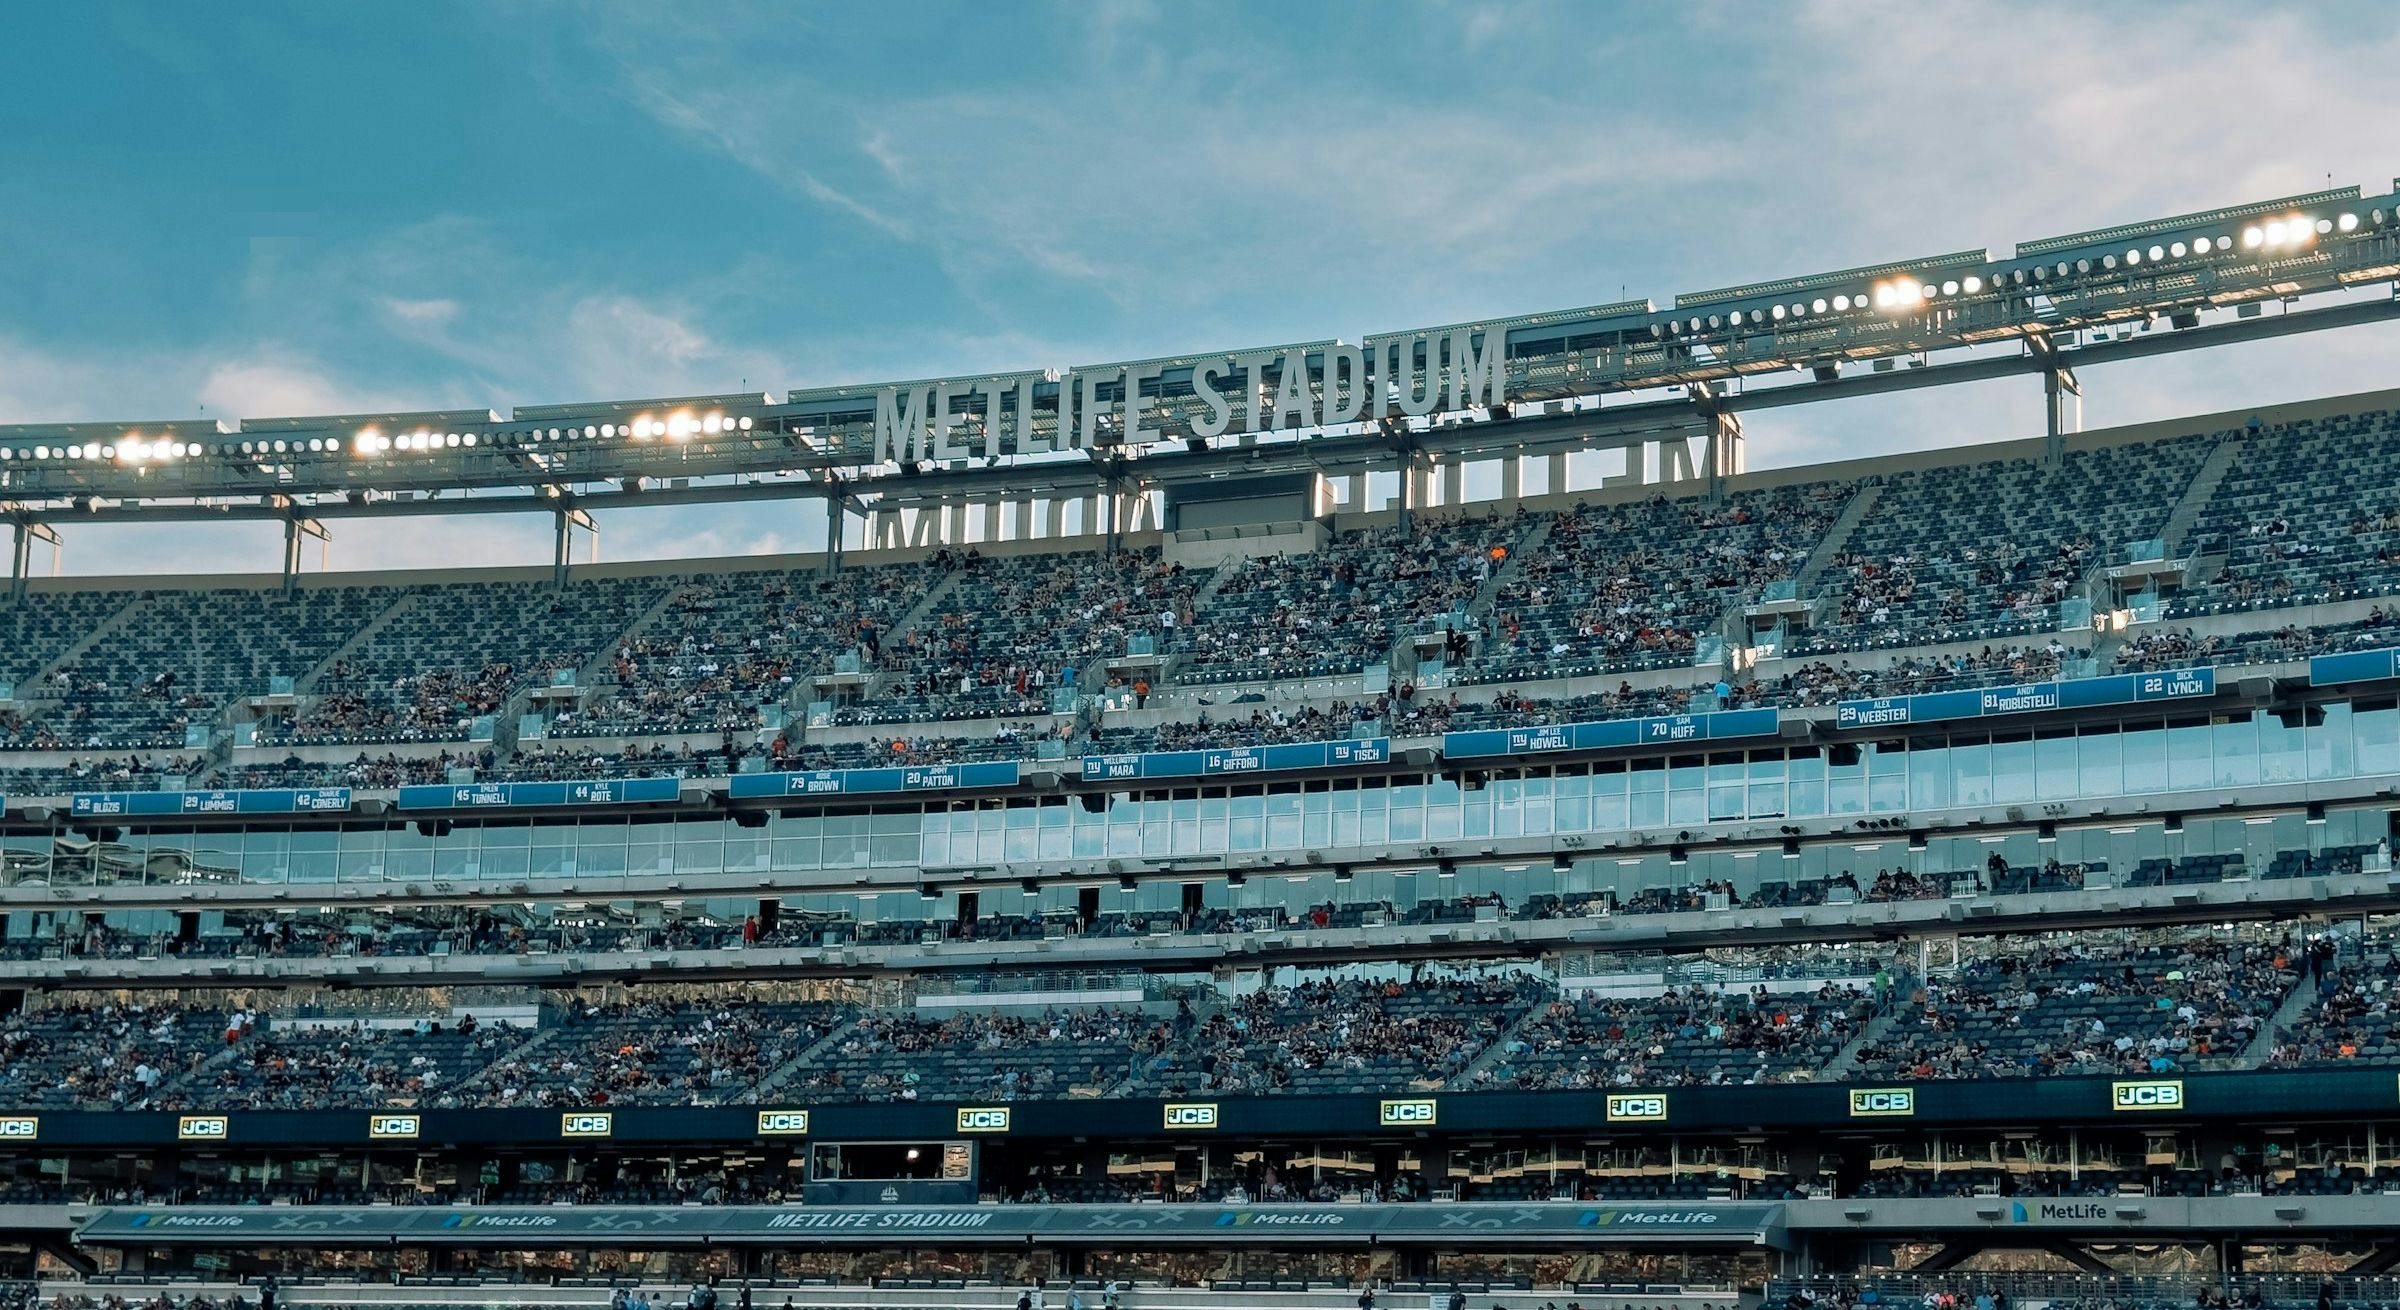 Image of the main stand of the Metlife Stadium in New Jersey